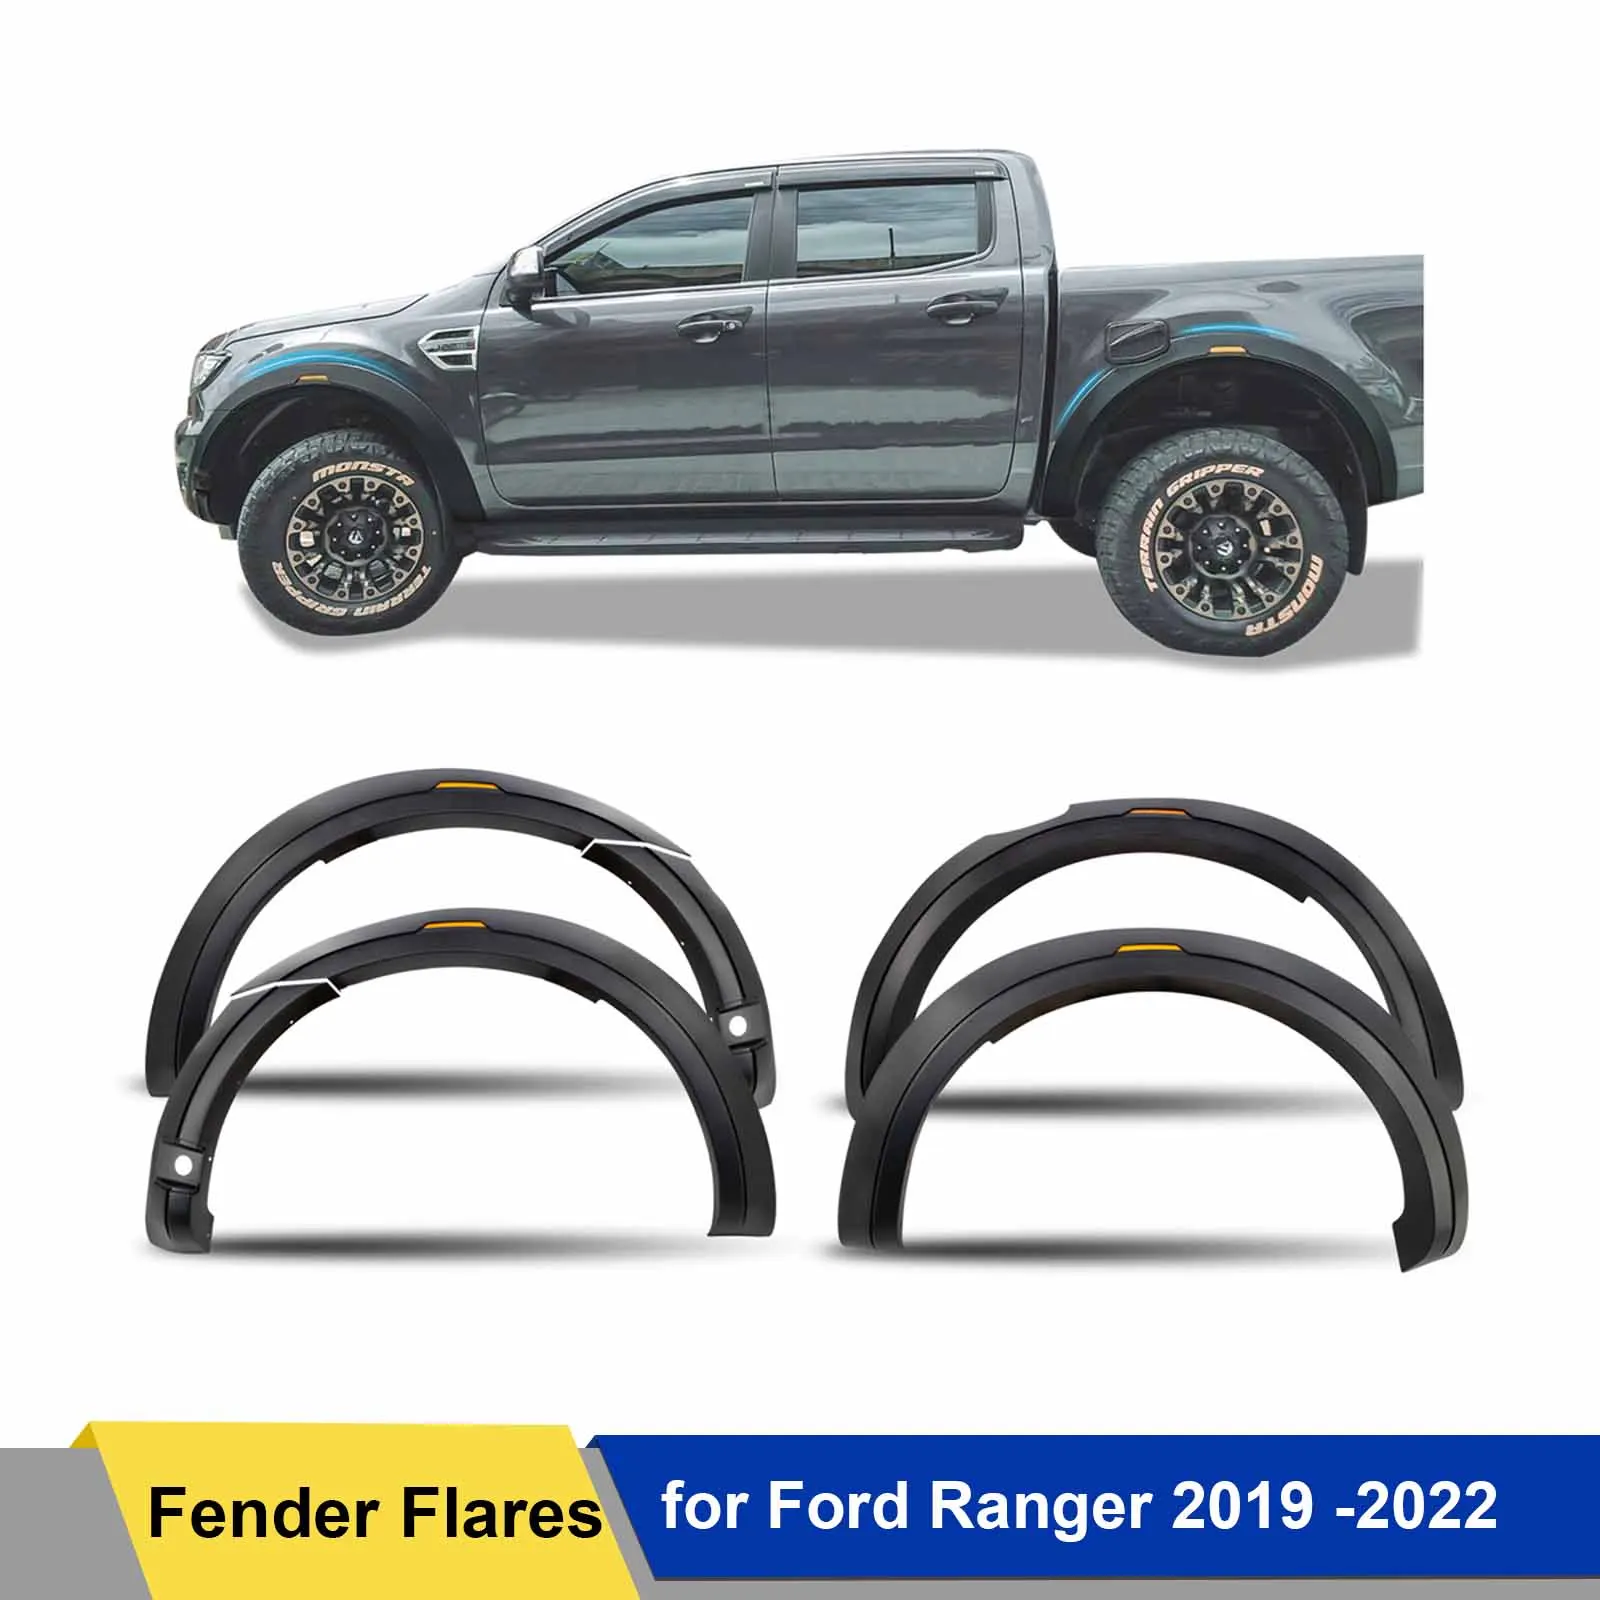 

Fender Flares Wheel Arch Raptor Style Guard For Ford Ranger 2015-2022 6pcs/set With Integrated LED Reflector 4X4 Car Accessories